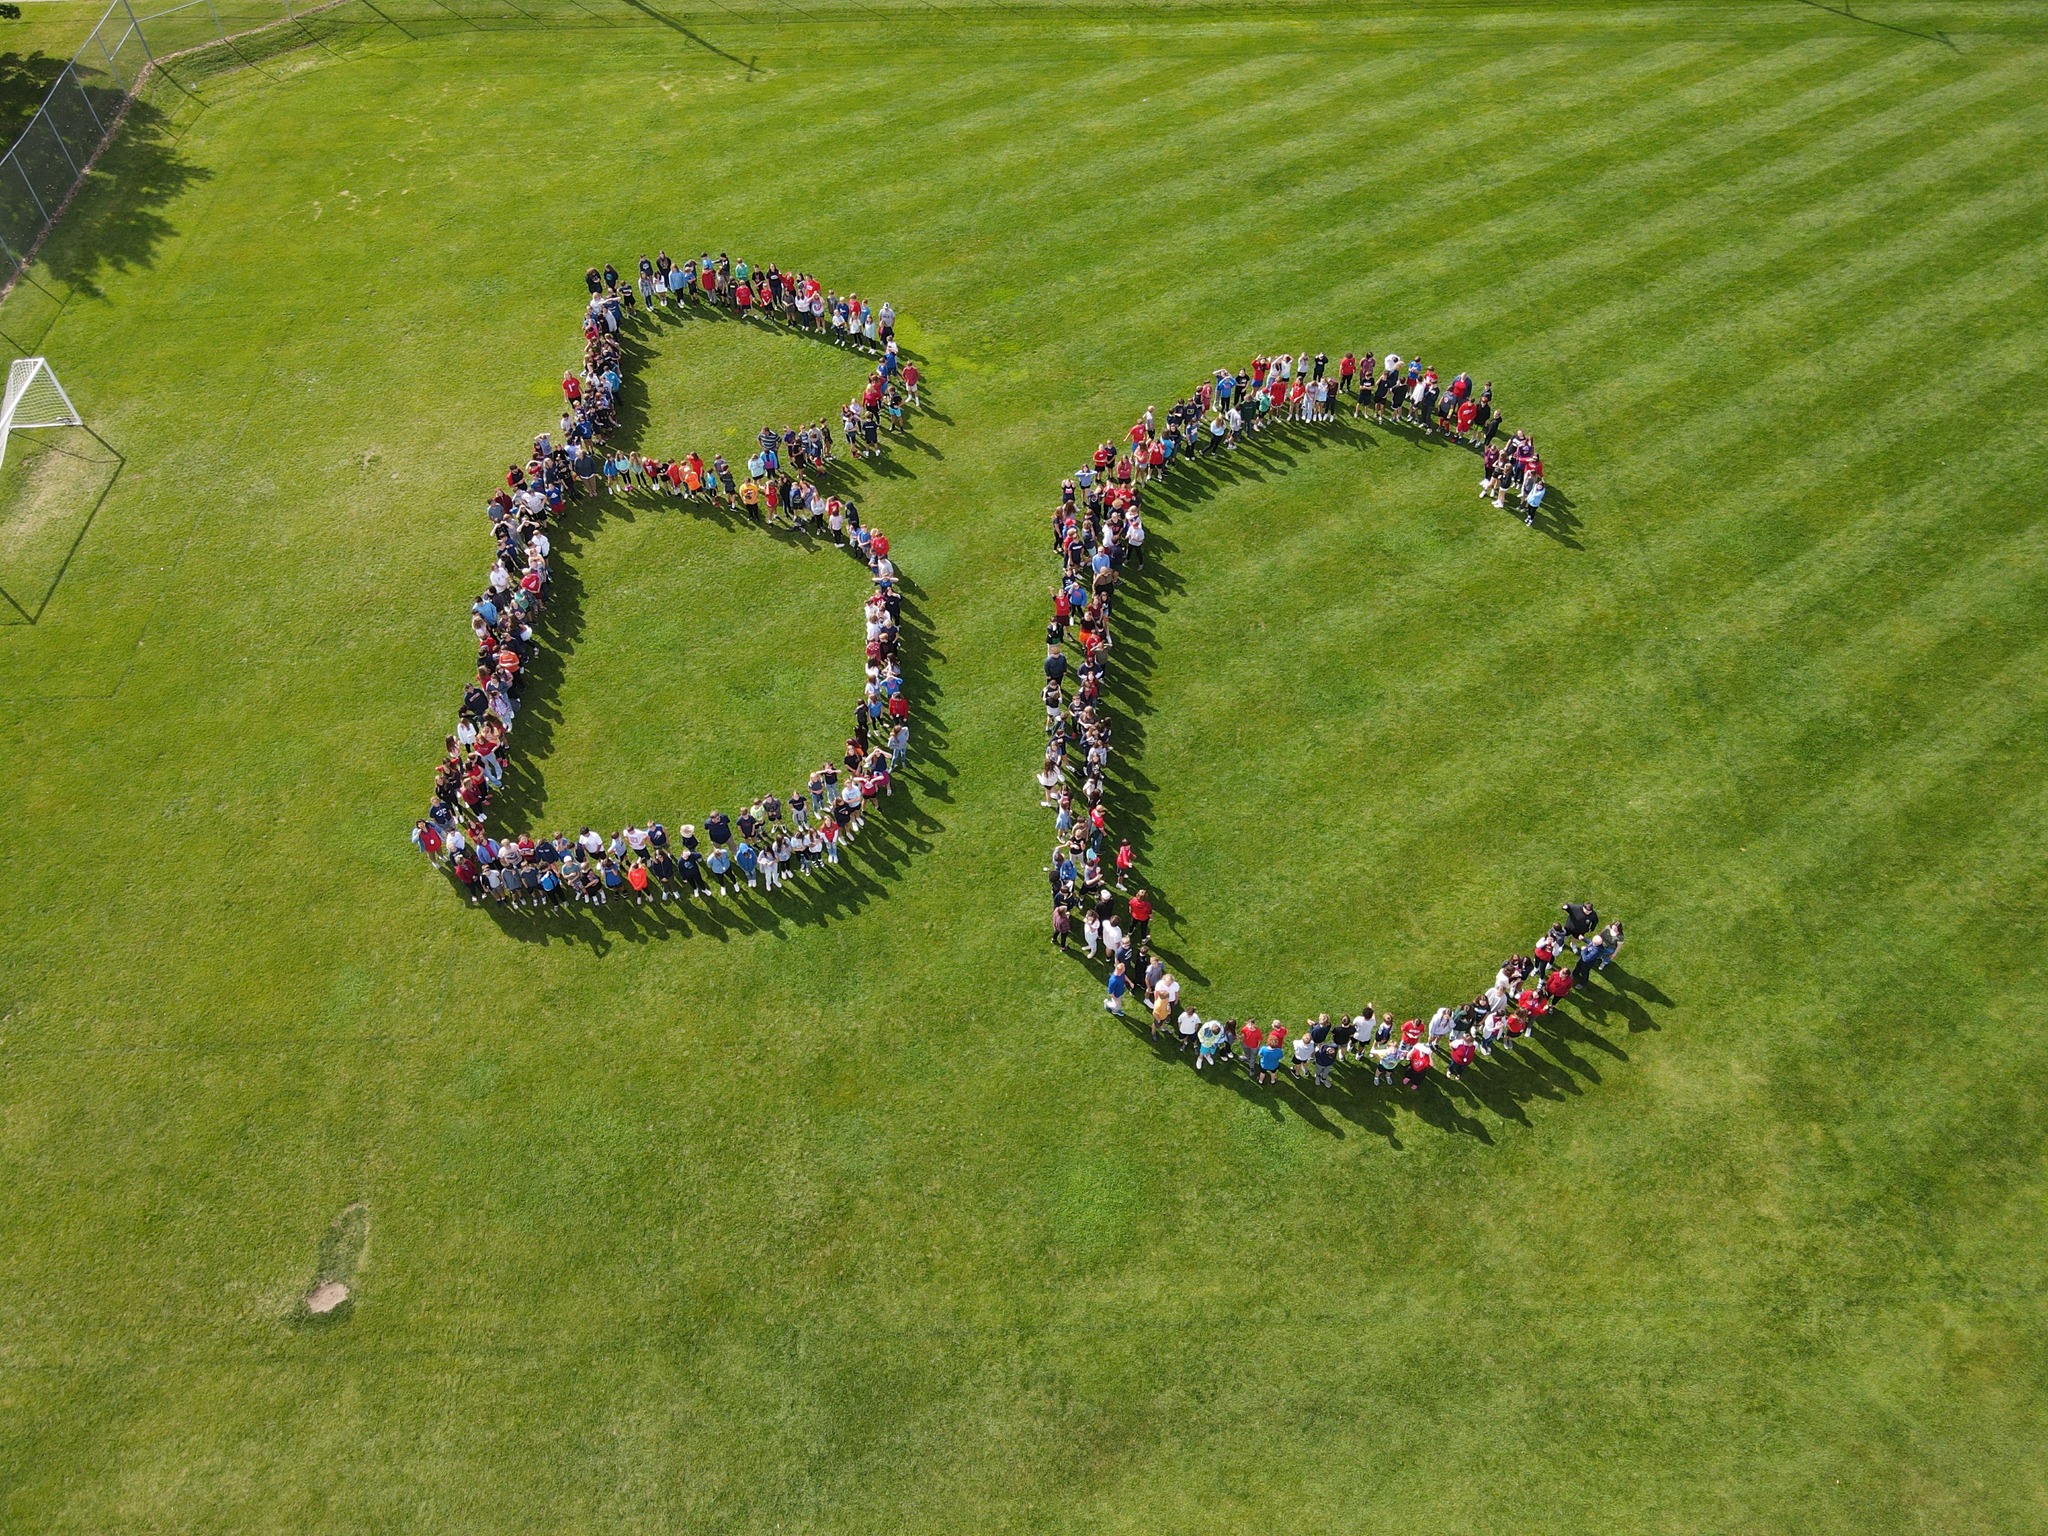 students and staff spelling B C on grass 